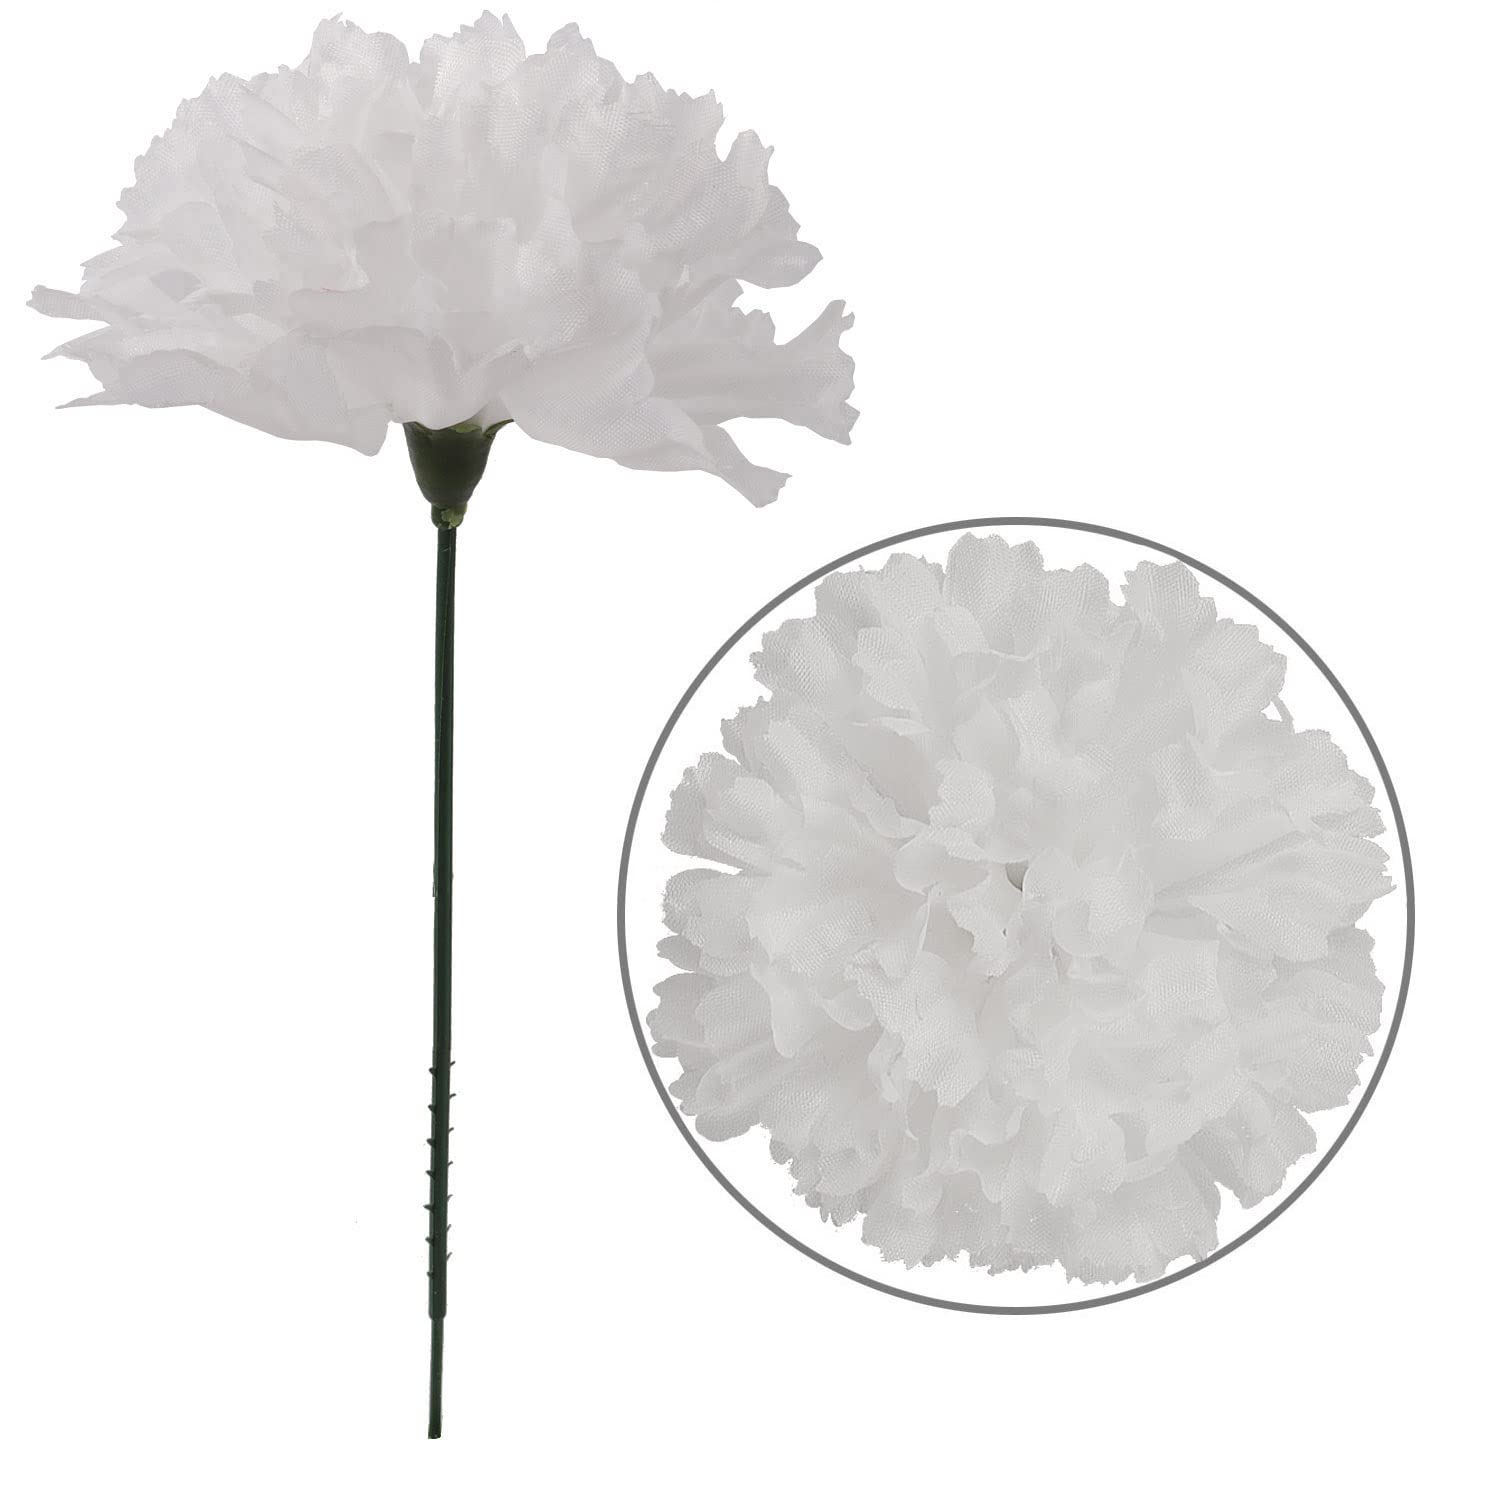 White Carnation 3.5"Diam 5"Pick - Stunning Artificial Carnation Flowers for DIY Wedding Bouquets, Centerpieces